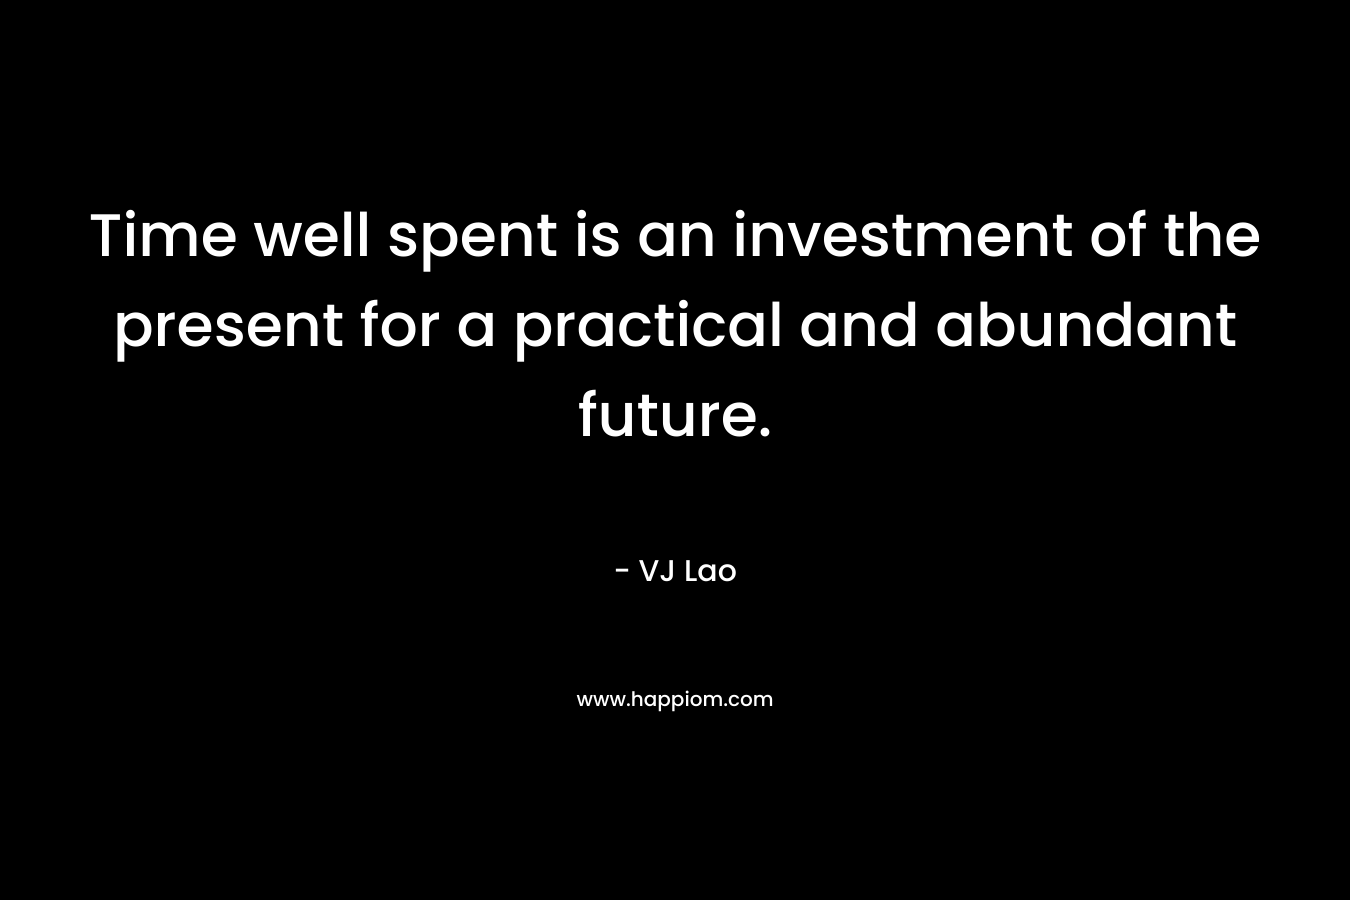 Time well spent is an investment of the present for a practical and abundant future.